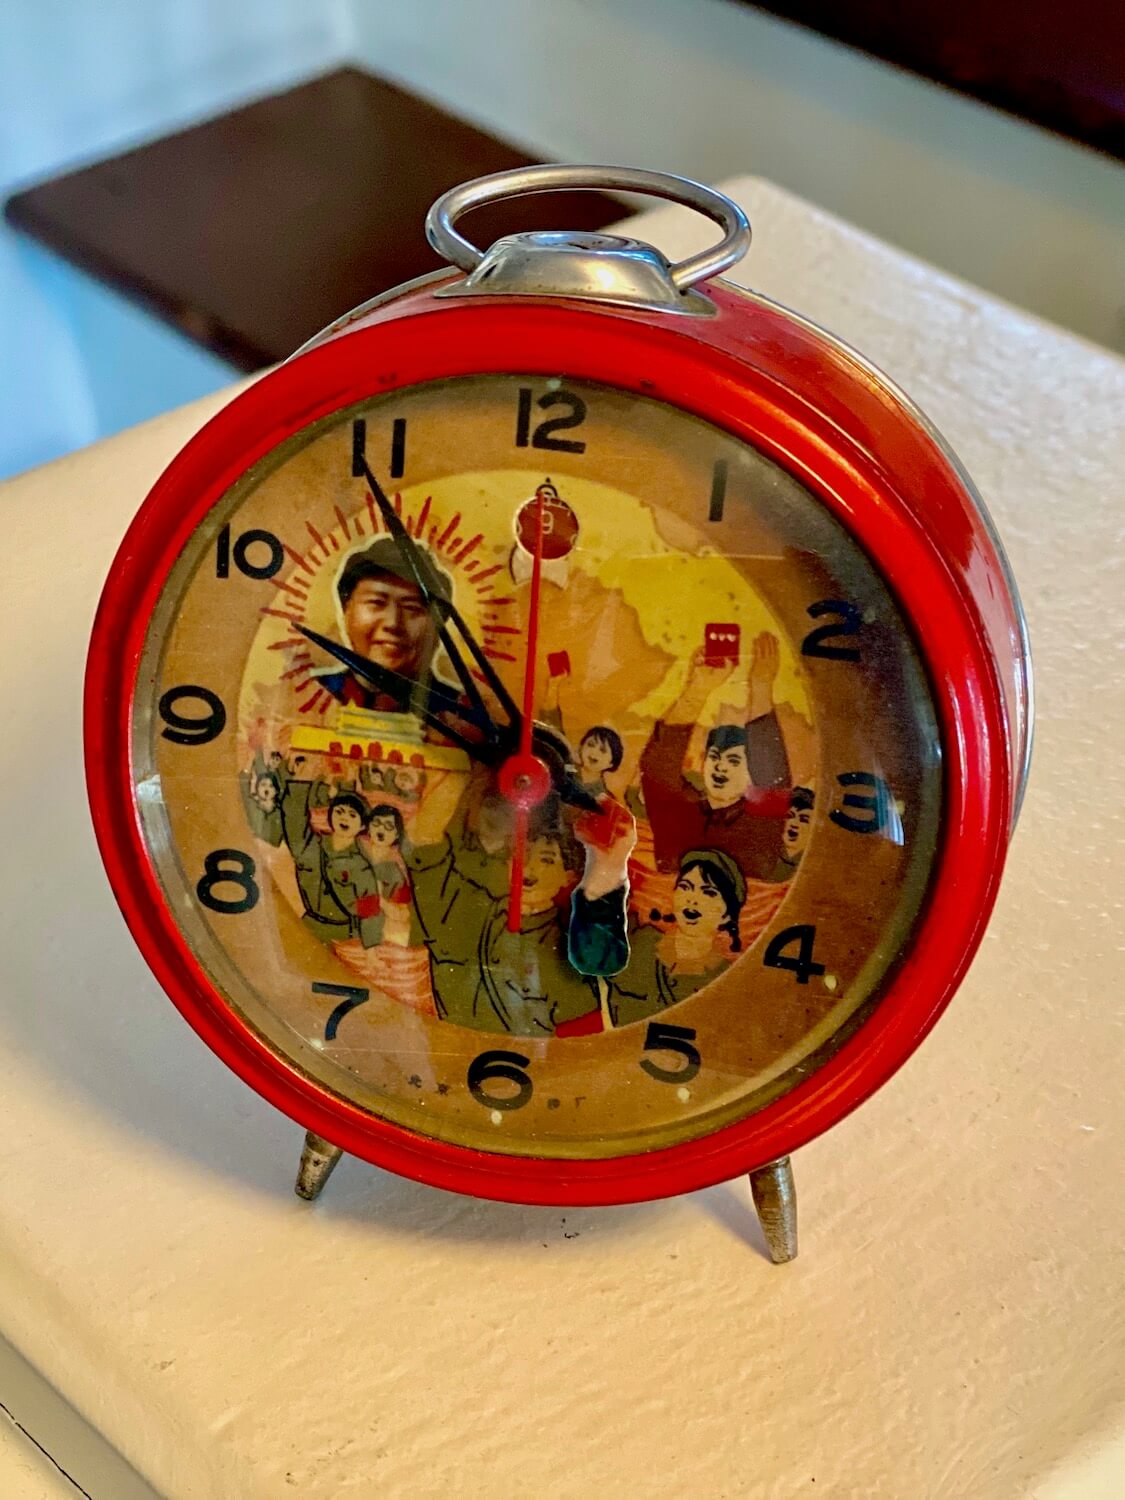 This alarm clock is vintage from 1950's era China and depicts Mao Se Tung and other communist characters inside the clock hands and western numbers. The body of the clock is bright Chinese red while the legs are aluminum color as well as the loop on top.